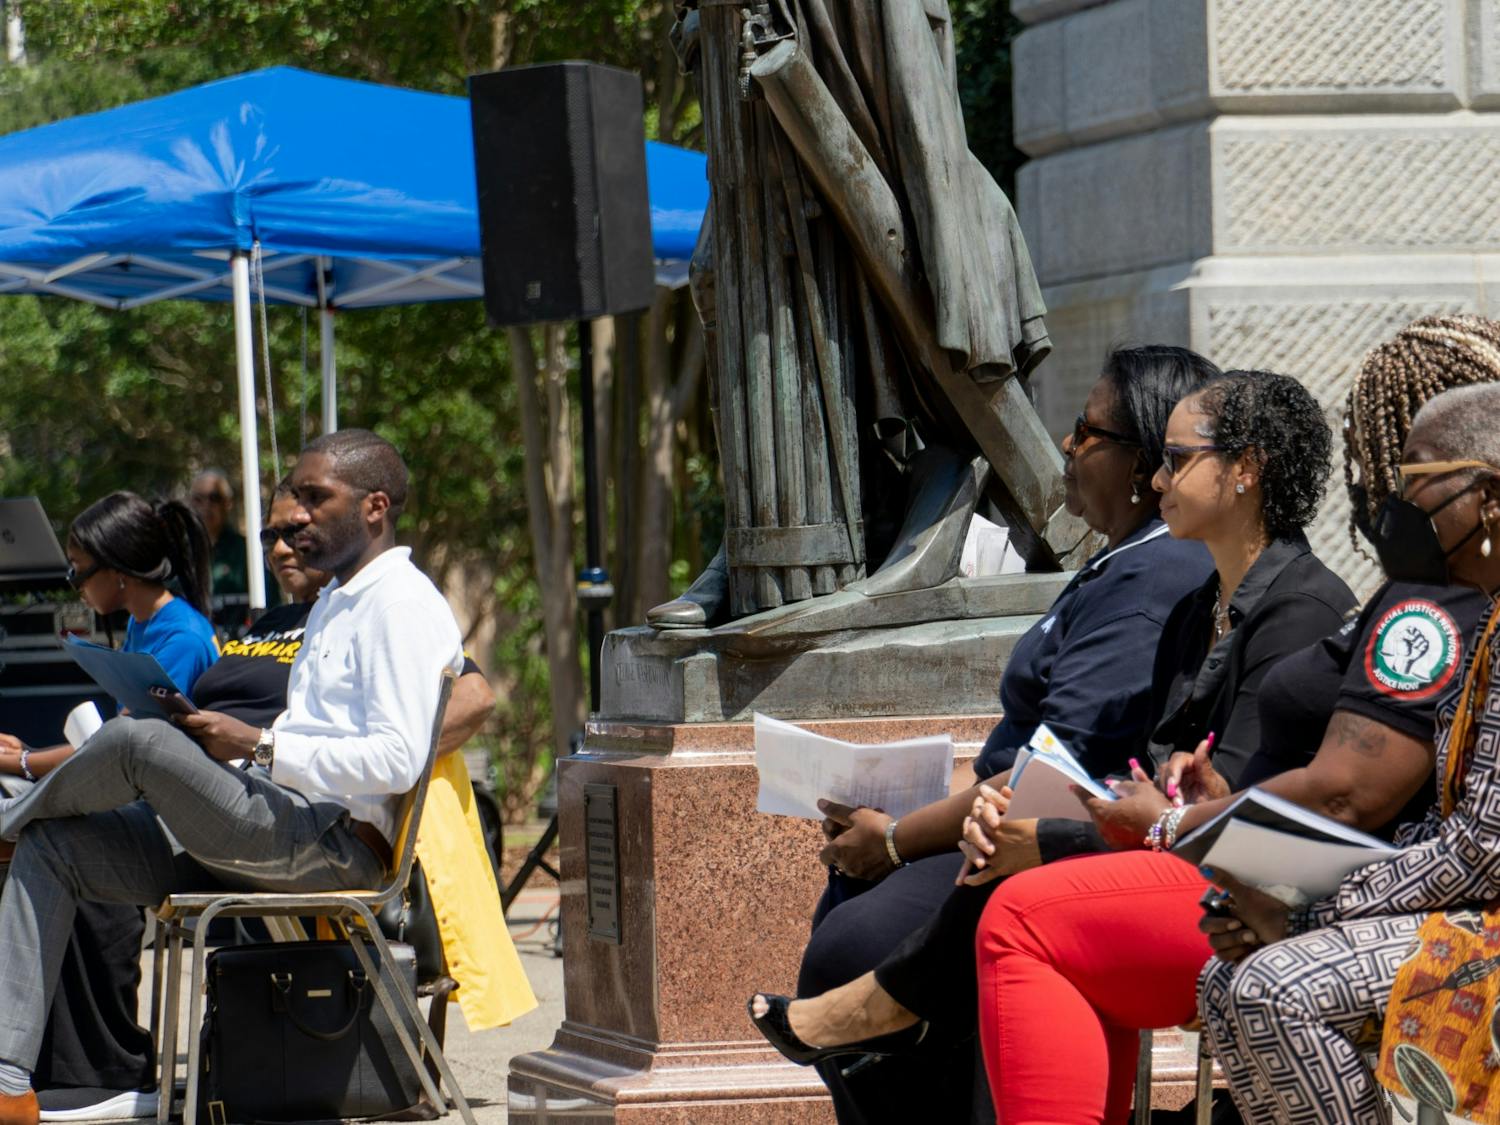 Speaker of the rally held by South Carolina State Conference of the NAACP sit along the SC statehouse on April 23, 2022. Speakers engage in conversation as they prepare to take to the podium to discuss race relations and their issues with the death penalty.